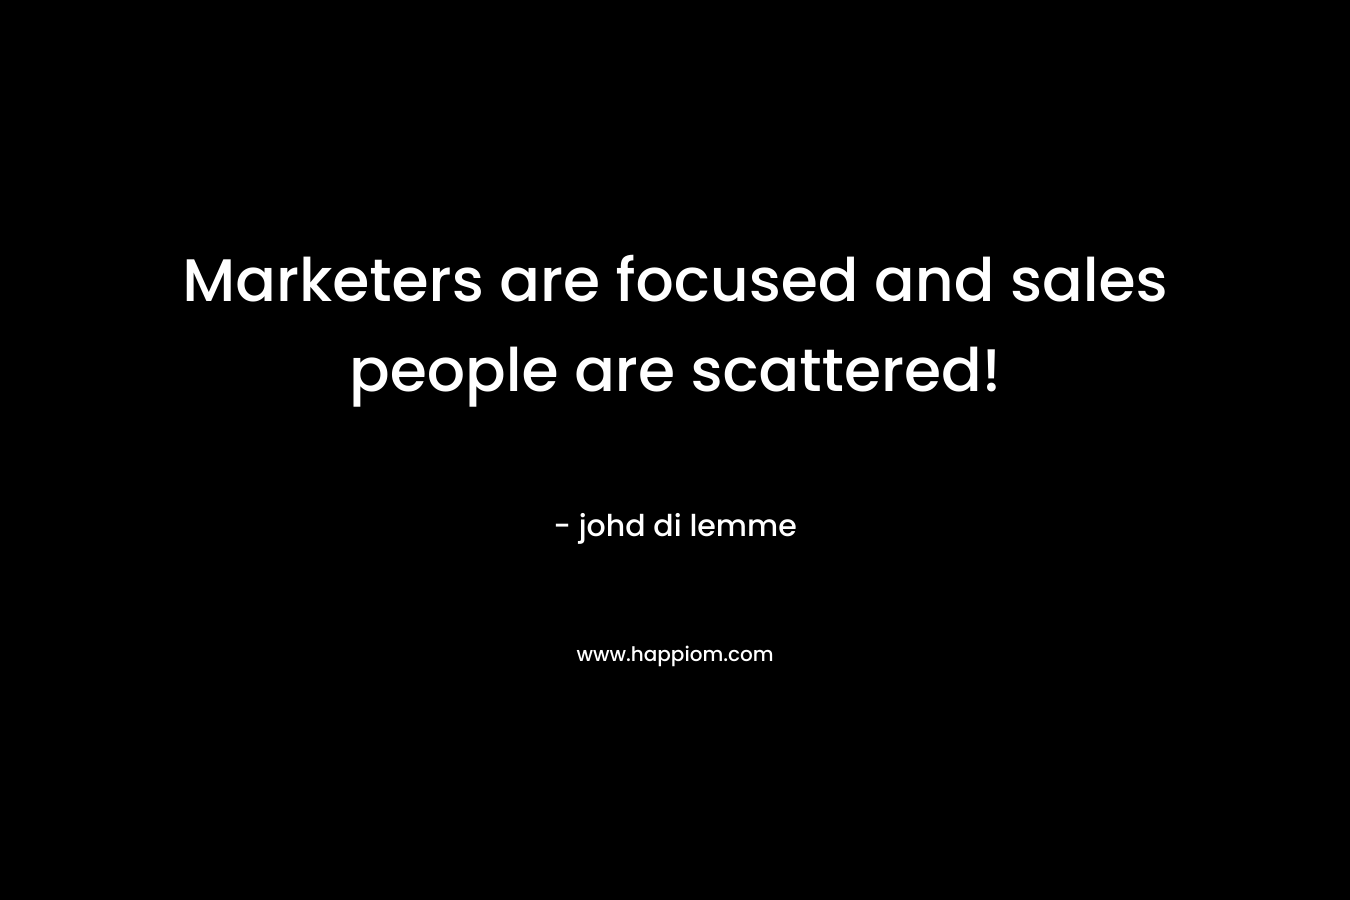 Marketers are focused and sales people are scattered!